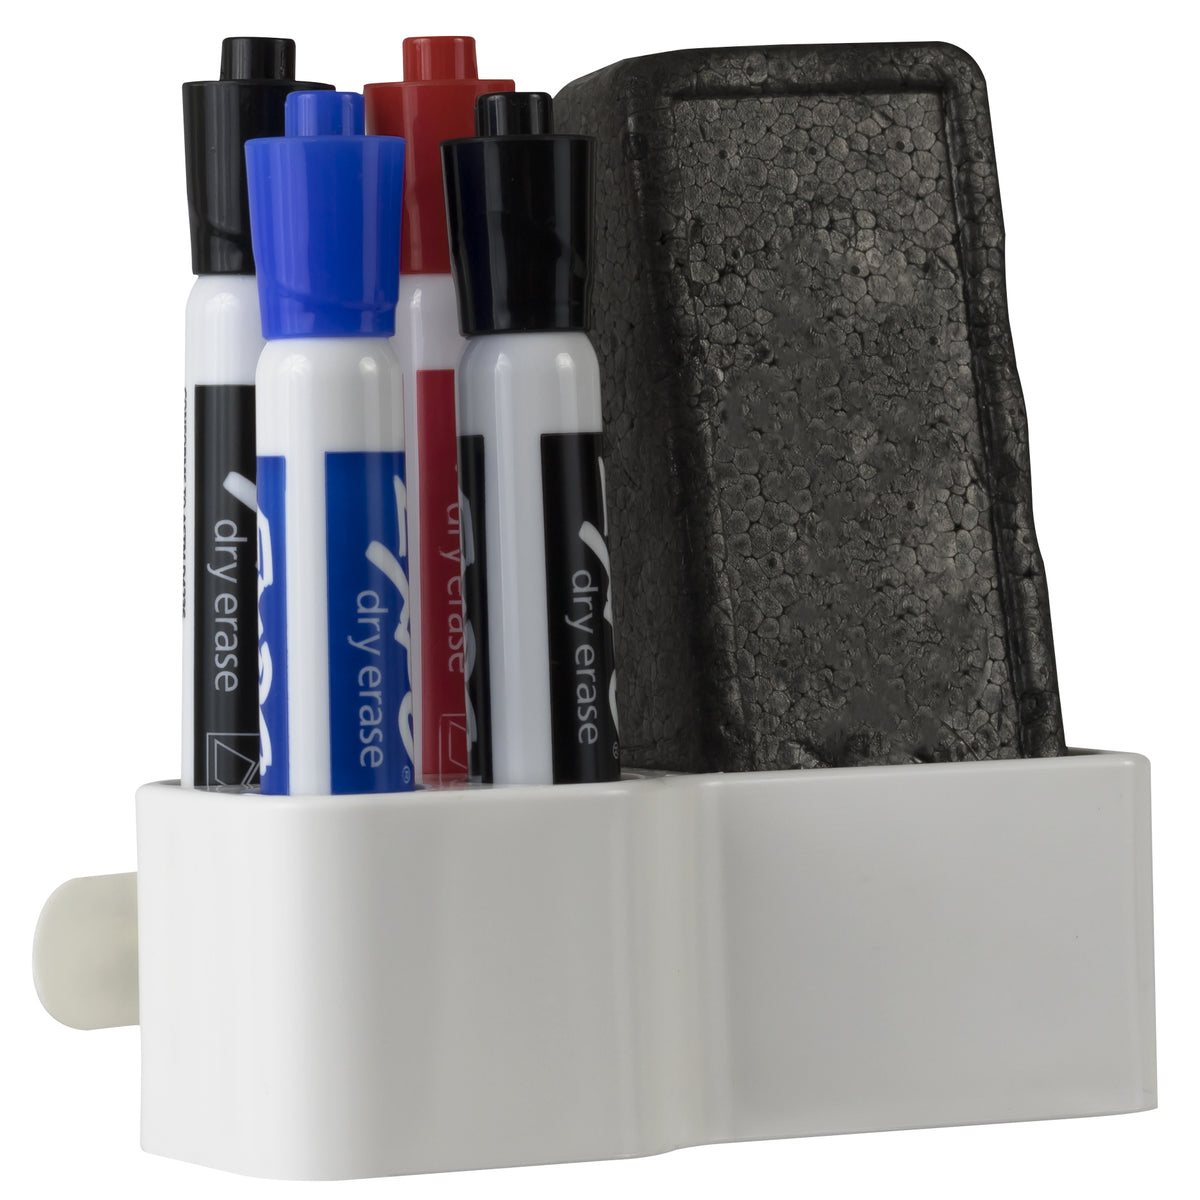 Storage Theory Marker Holder Holds 11 Markers and 1 Eraser - Peel and Stick - White 1pk